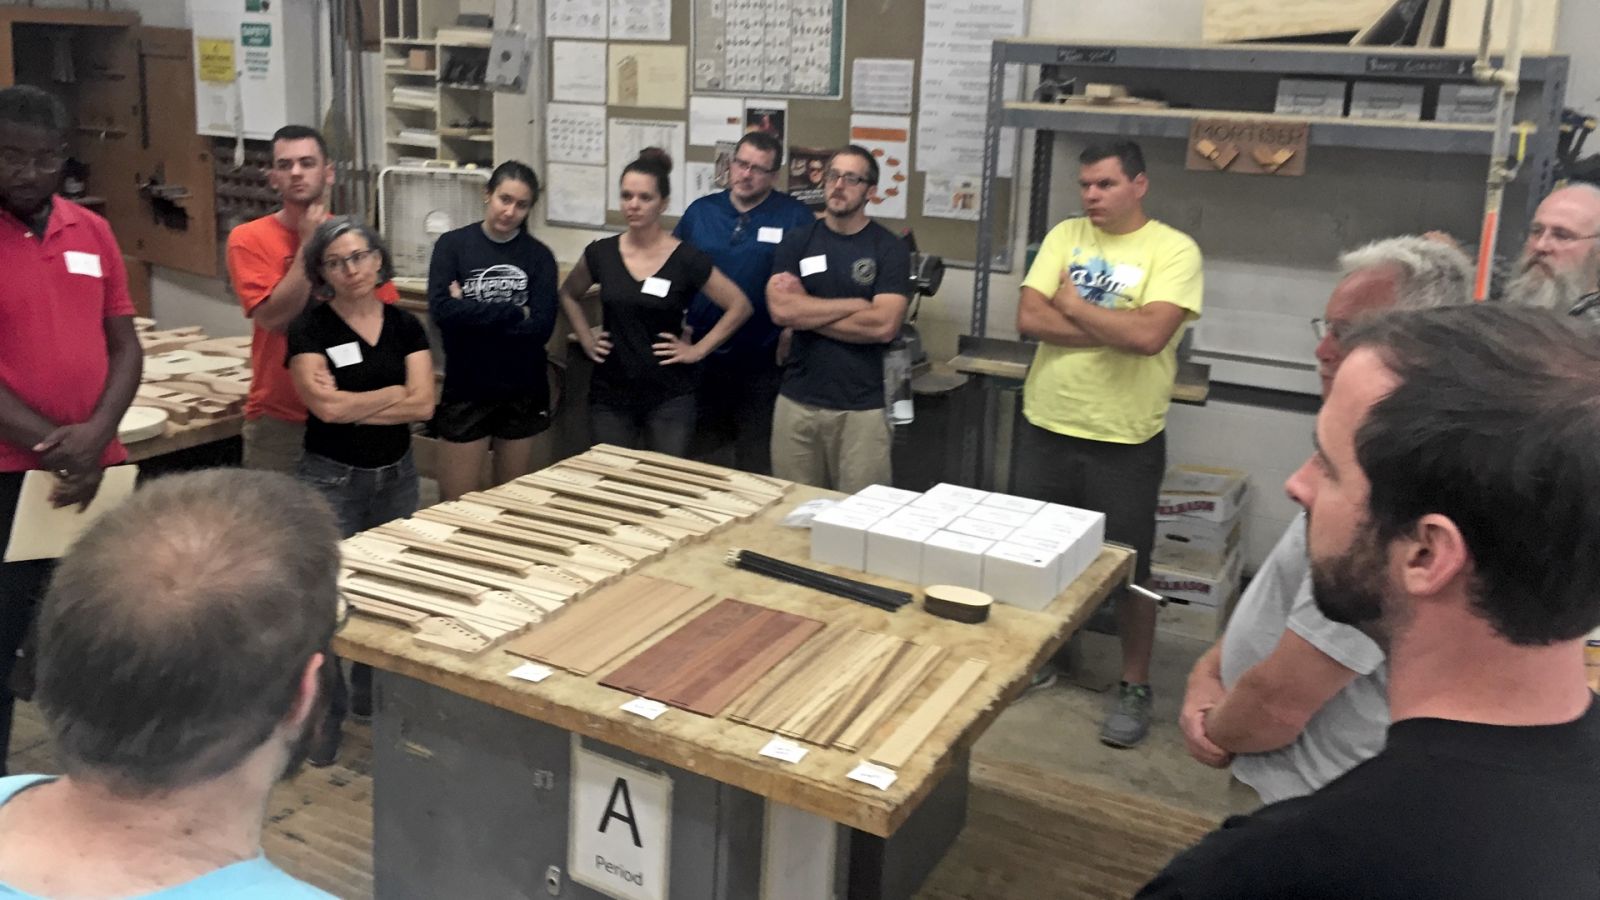 Pennsbury High School teachers receive directions as they prepare to build electric guitars